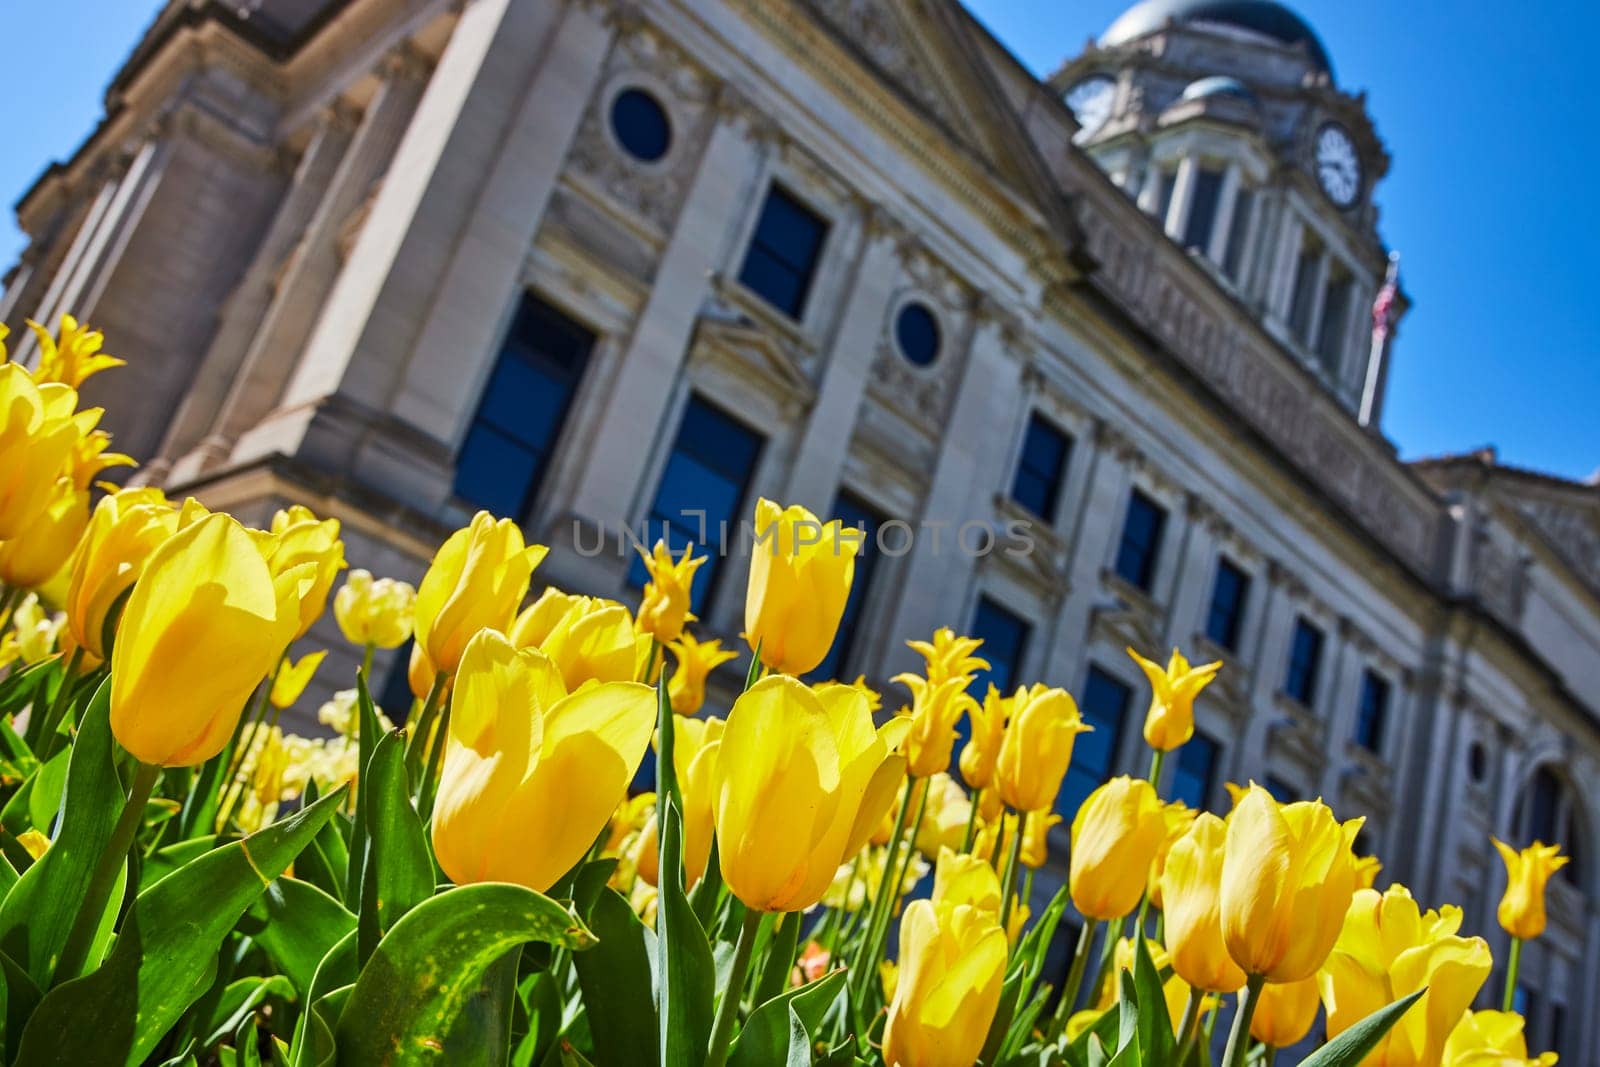 Bright yellow tulips bloom in front of the classical Allen Superior Courthouse in downtown Fort Wayne.